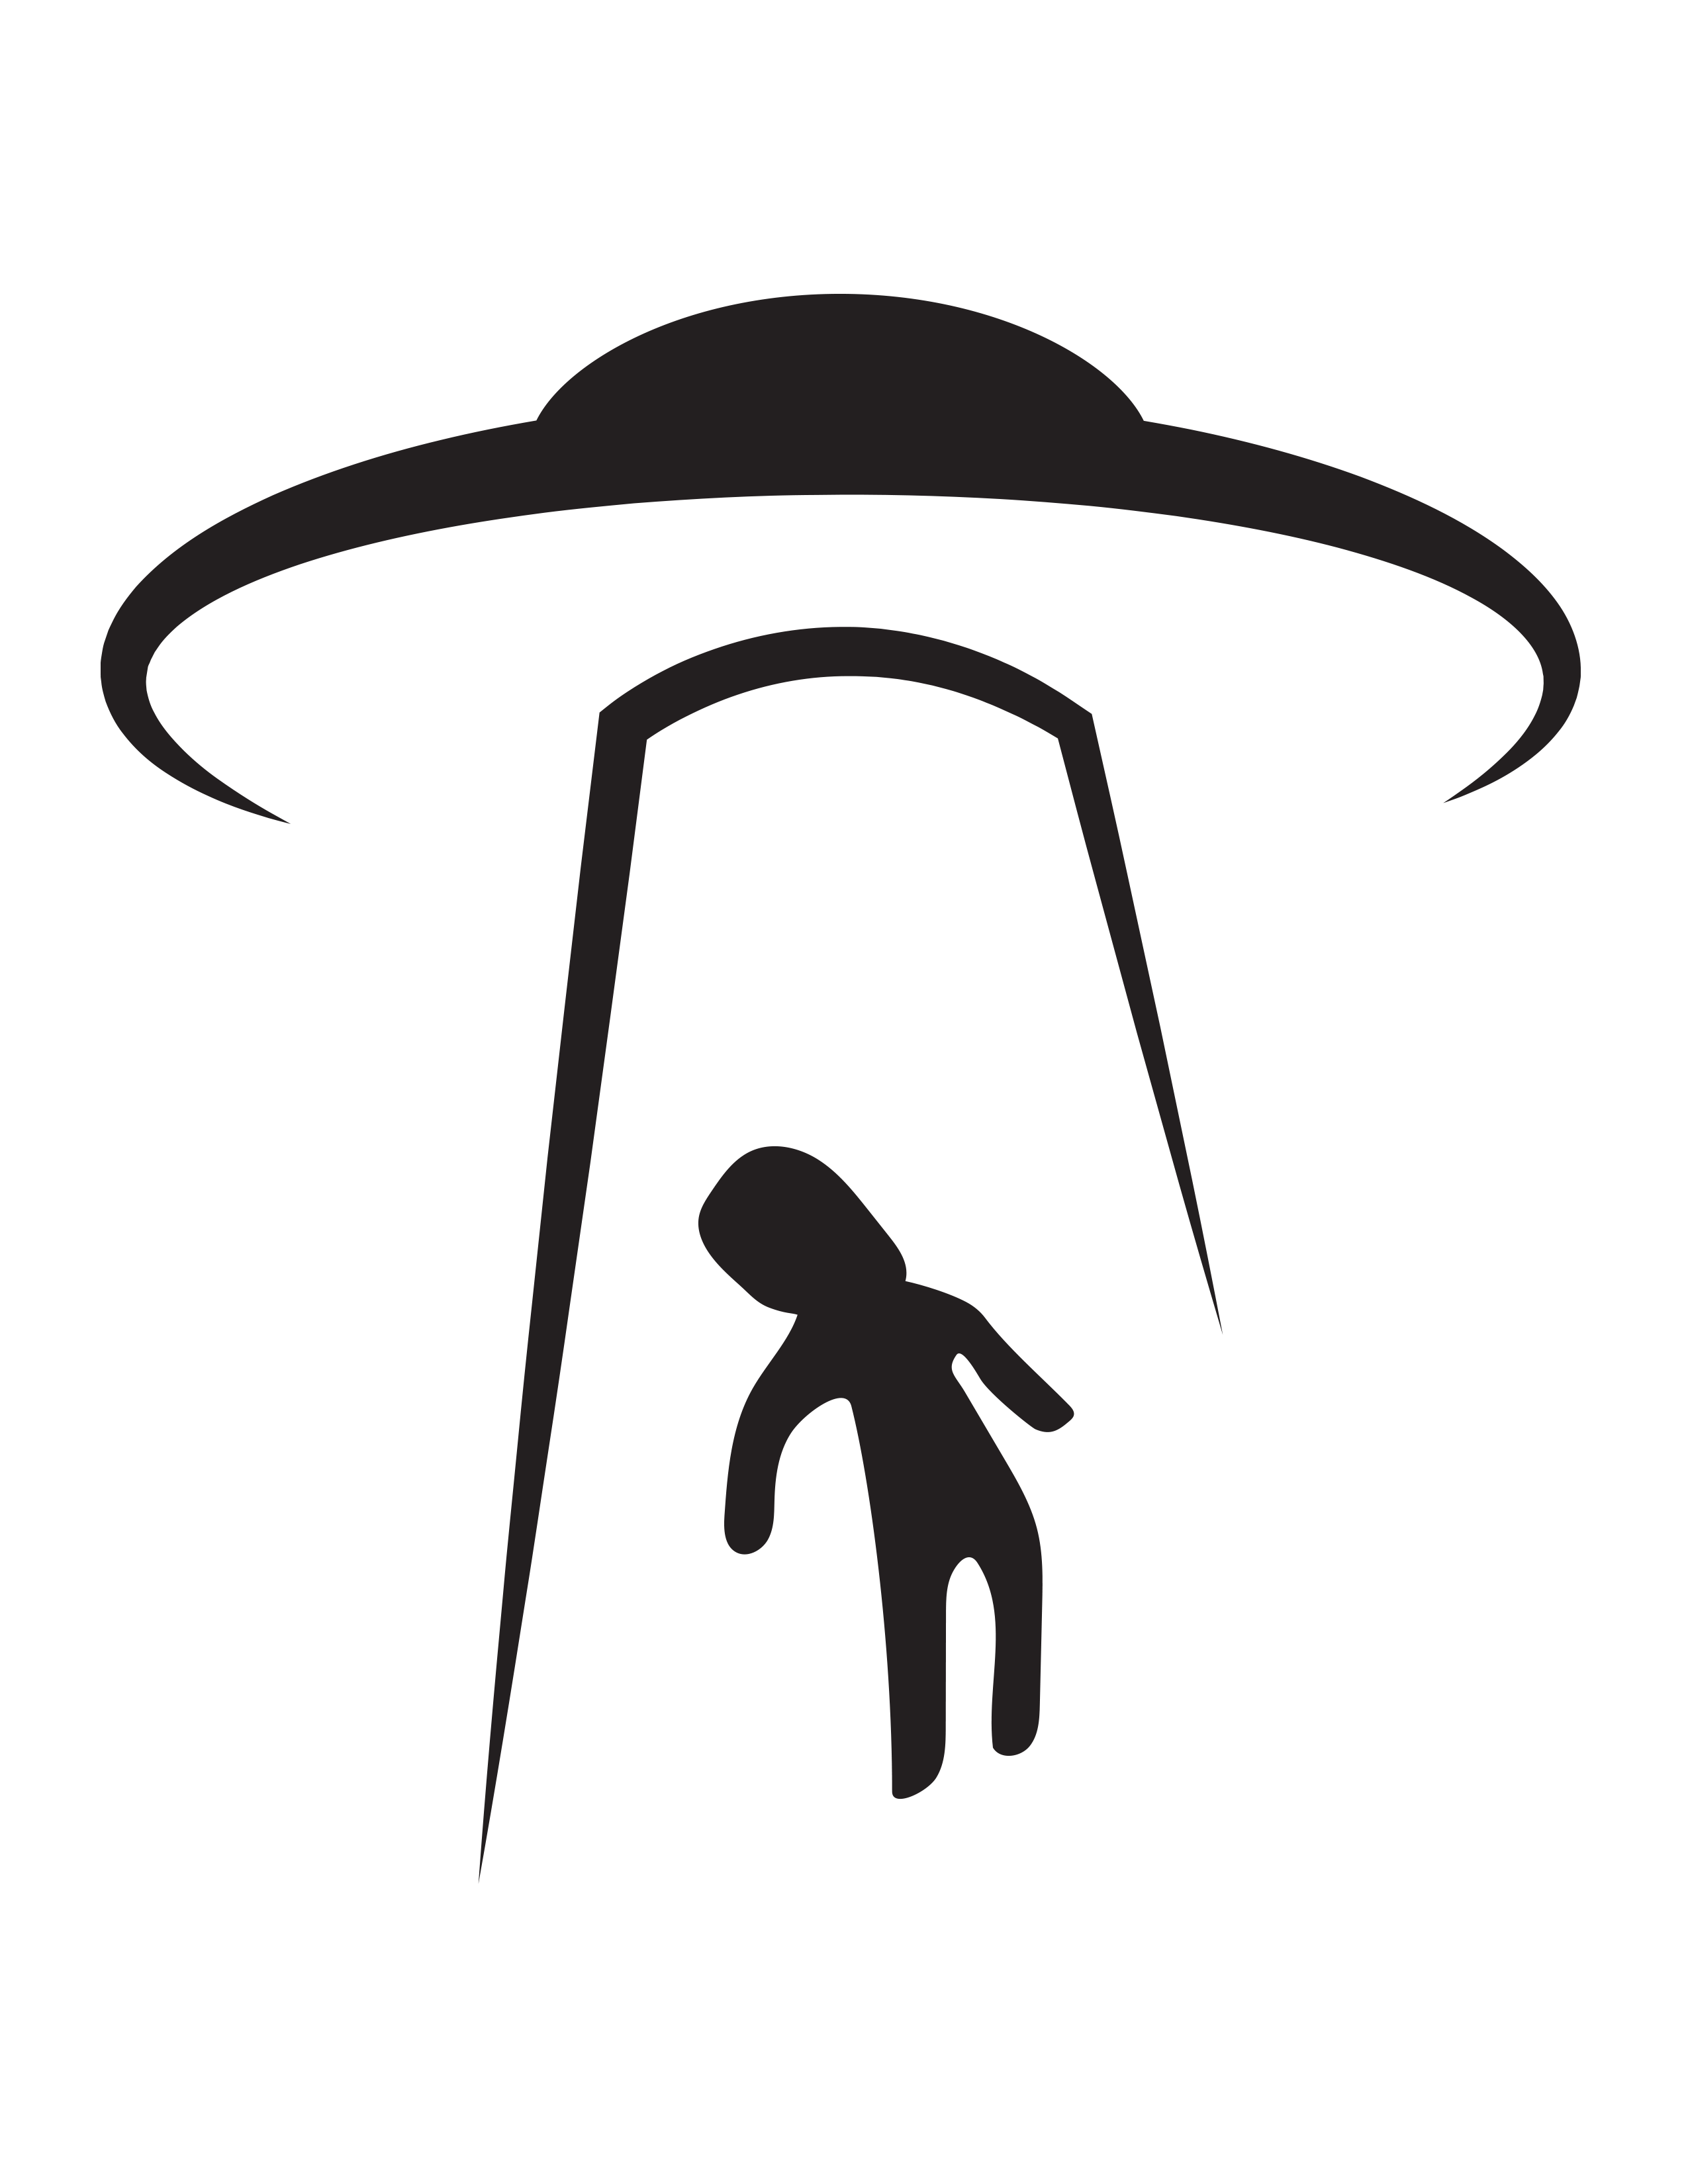 Flying-saucer icons | Noun Project